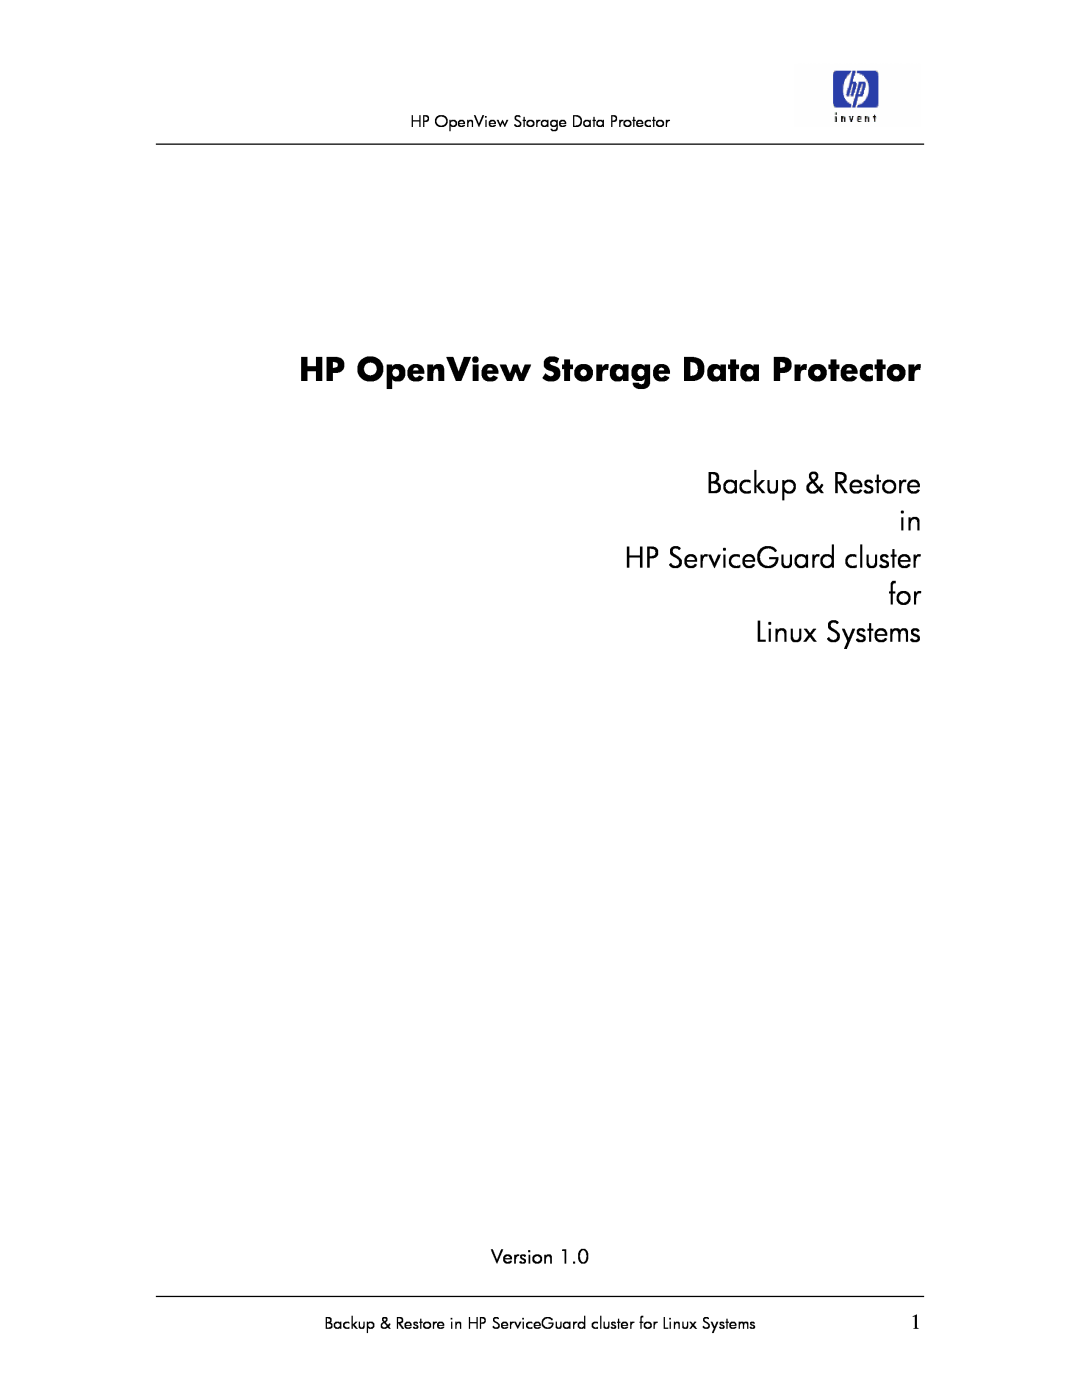 HP V5.1 Software manual HP OpenView Storage Data Protector, Backup & Restore in HP ServiceGuard cluster for Linux Systems 